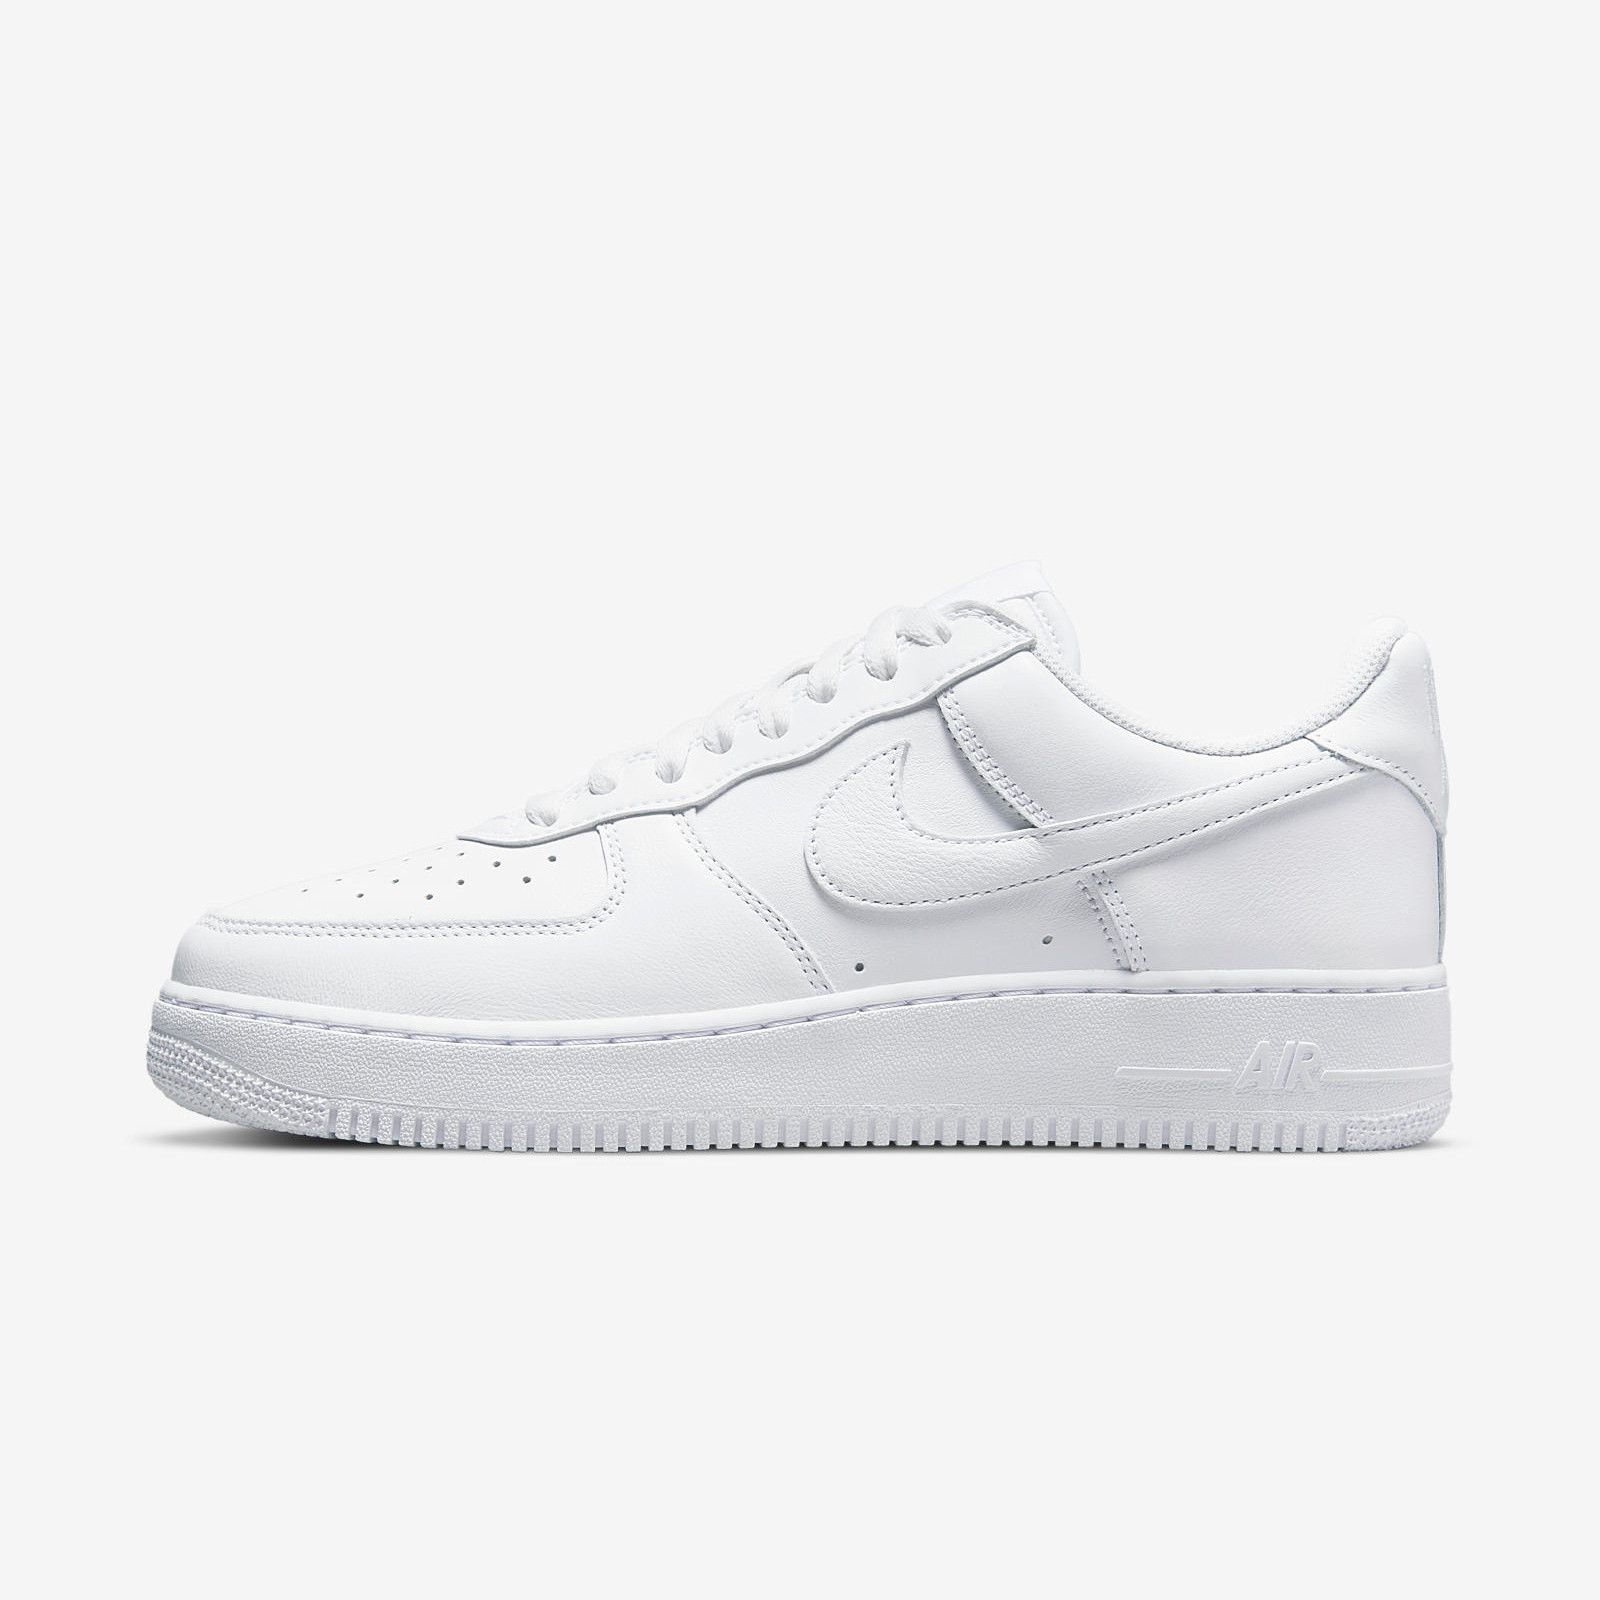 Nike Air Force 1 Low Retro
« Color of the Month »